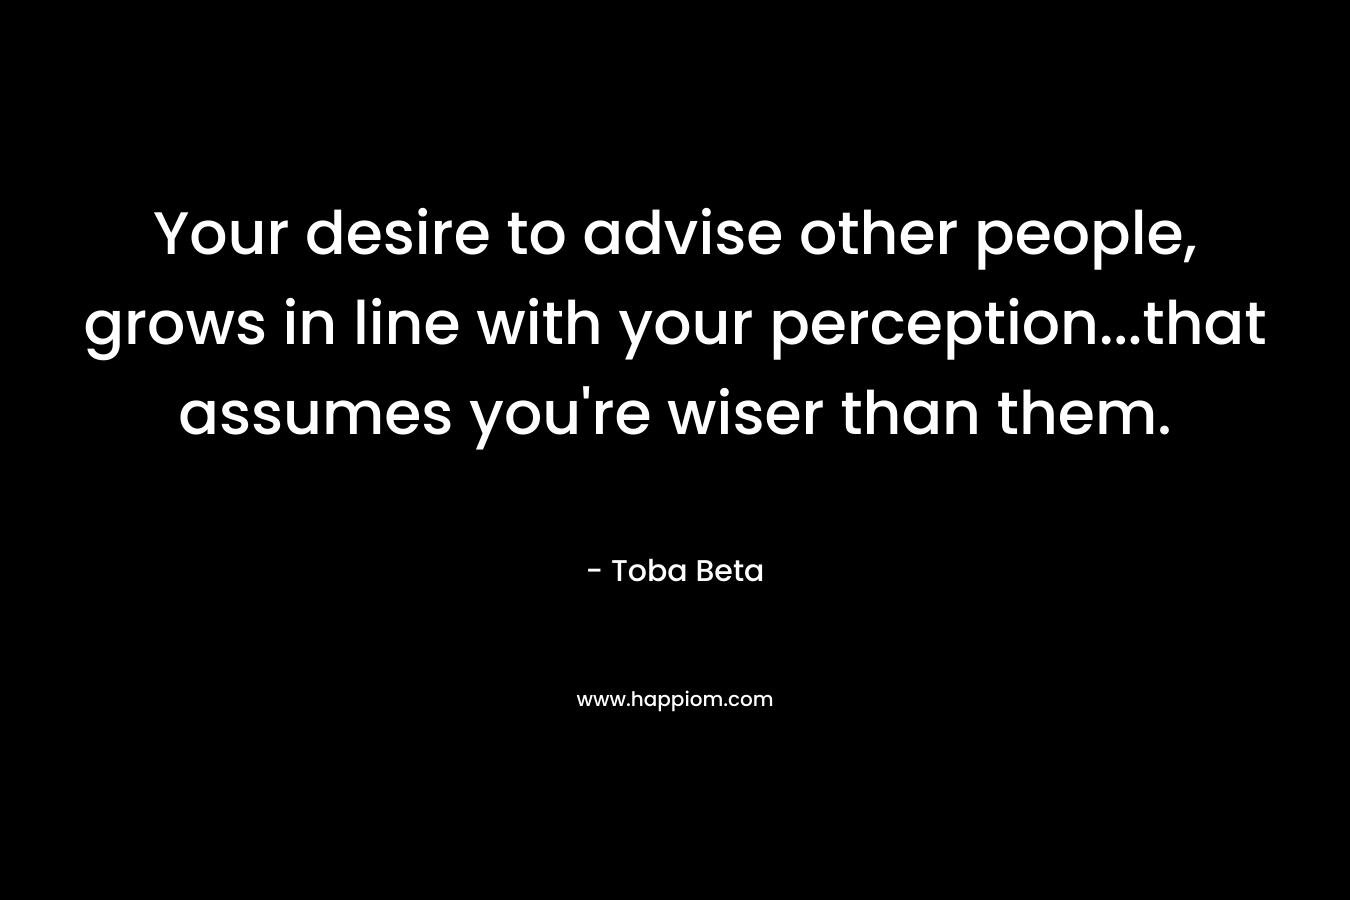 Your desire to advise other people, grows in line with your perception...that assumes you're wiser than them.